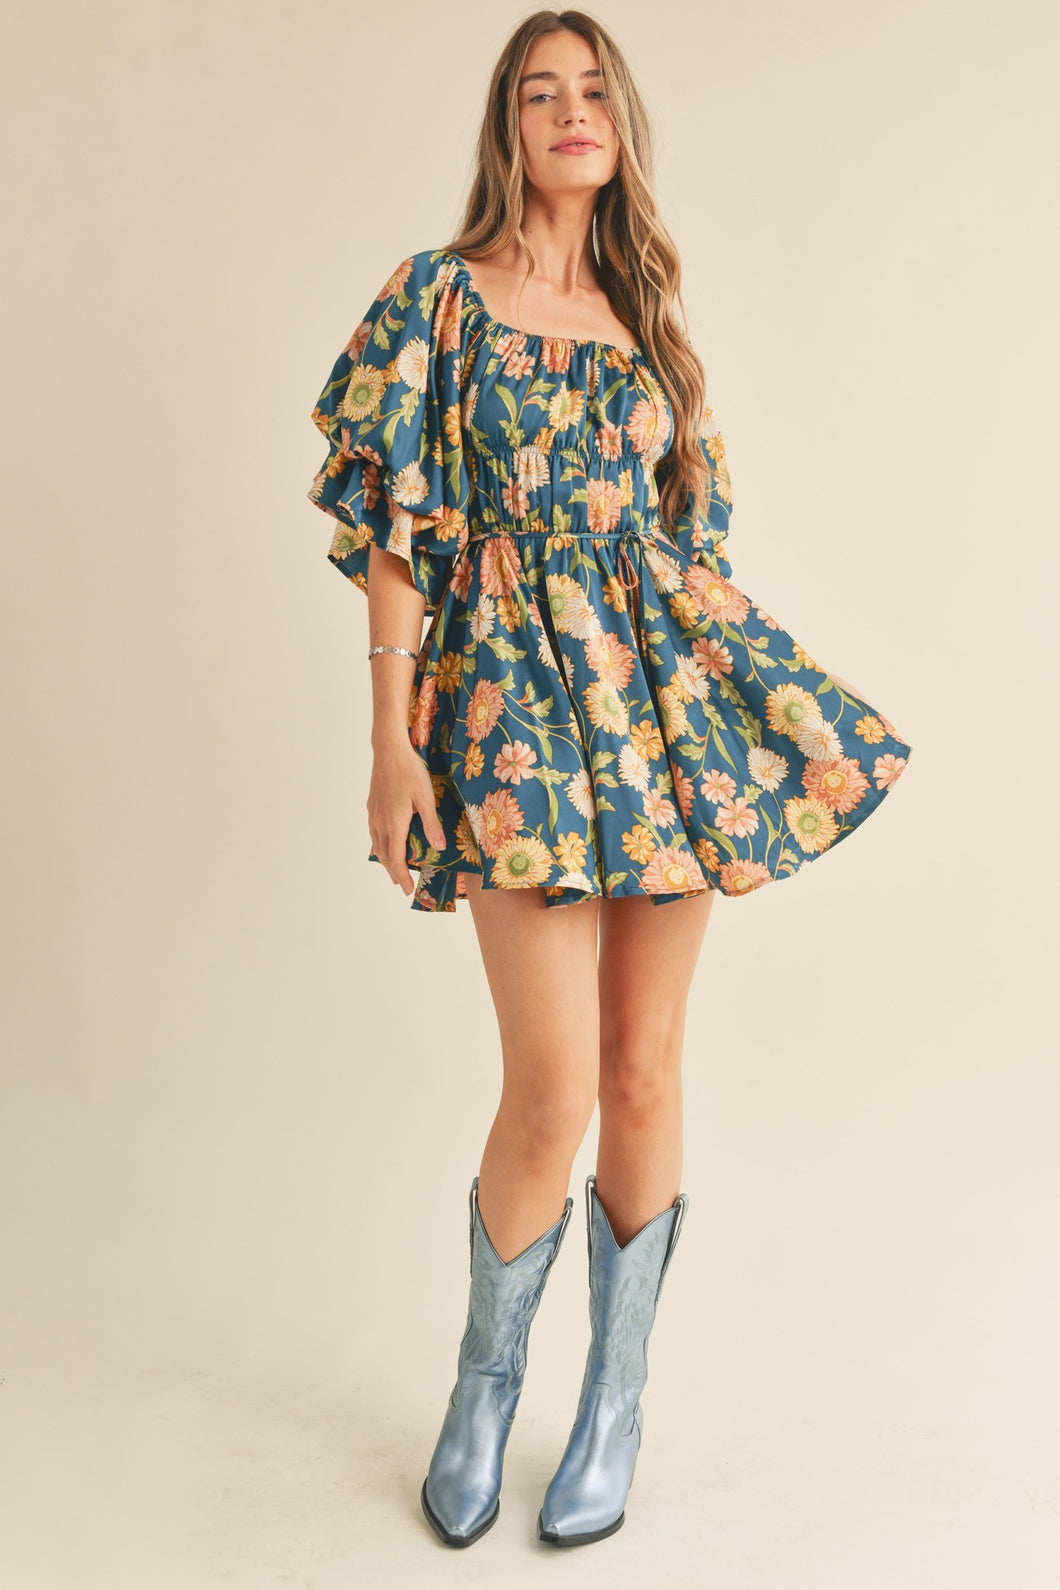 Faye Teal Floral Ruched Mini Dress